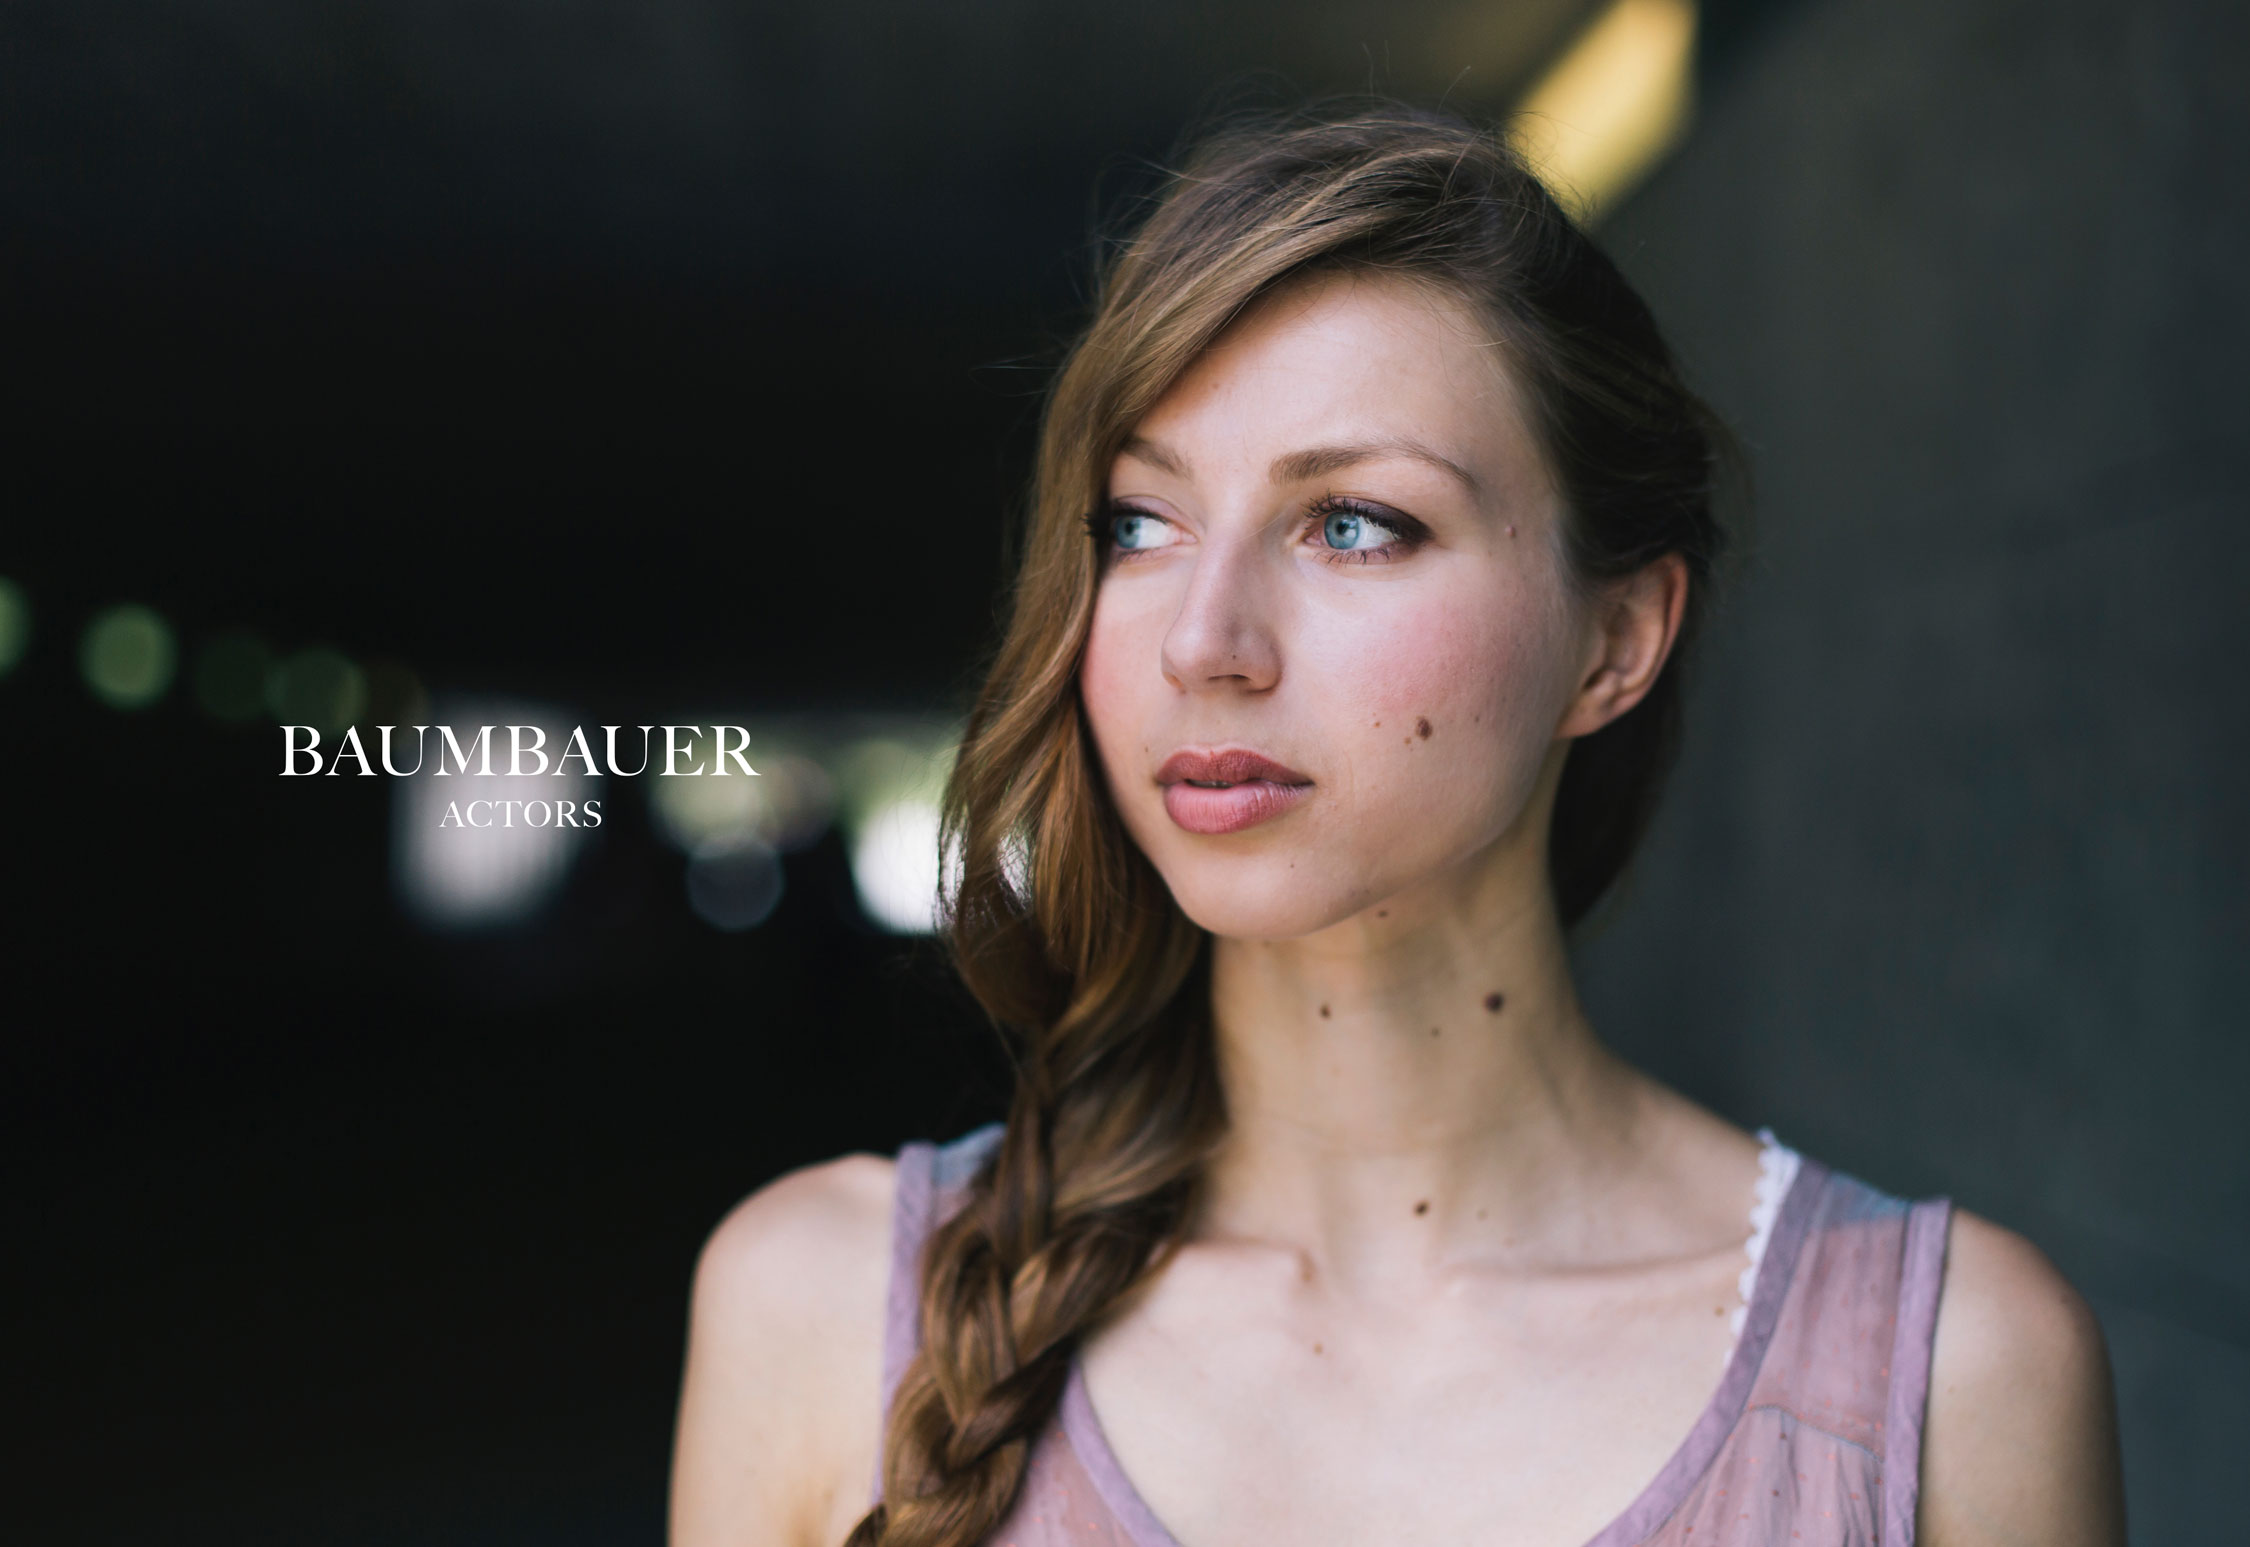 Baumbauer Actors website designed by She Was Only